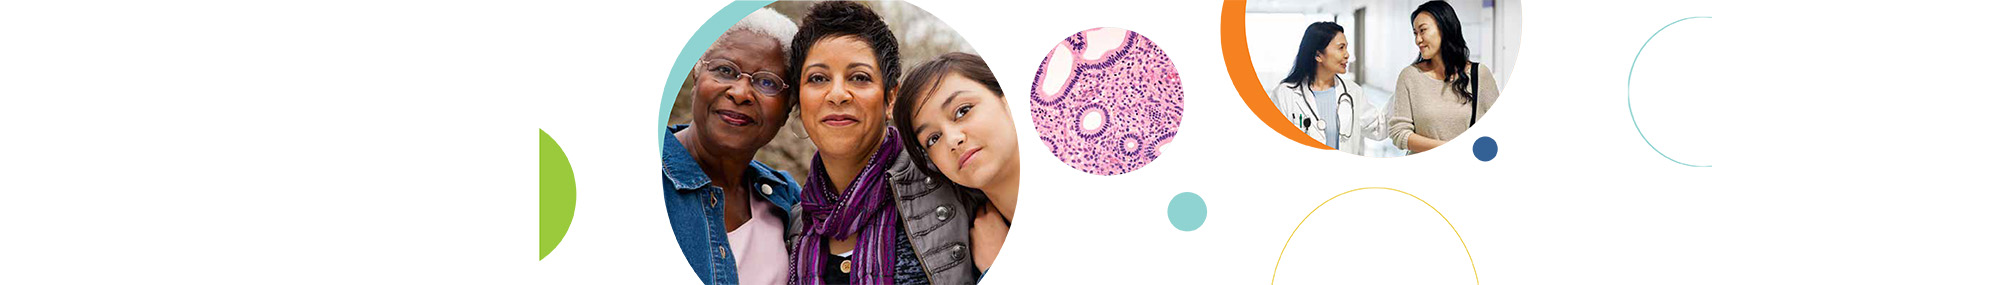 A series of three circular images related to endometriosis awareness, including three multi-generational women (left), a microscope image of uterine cells (center), and a person walking and talking to a health care provider (right). 